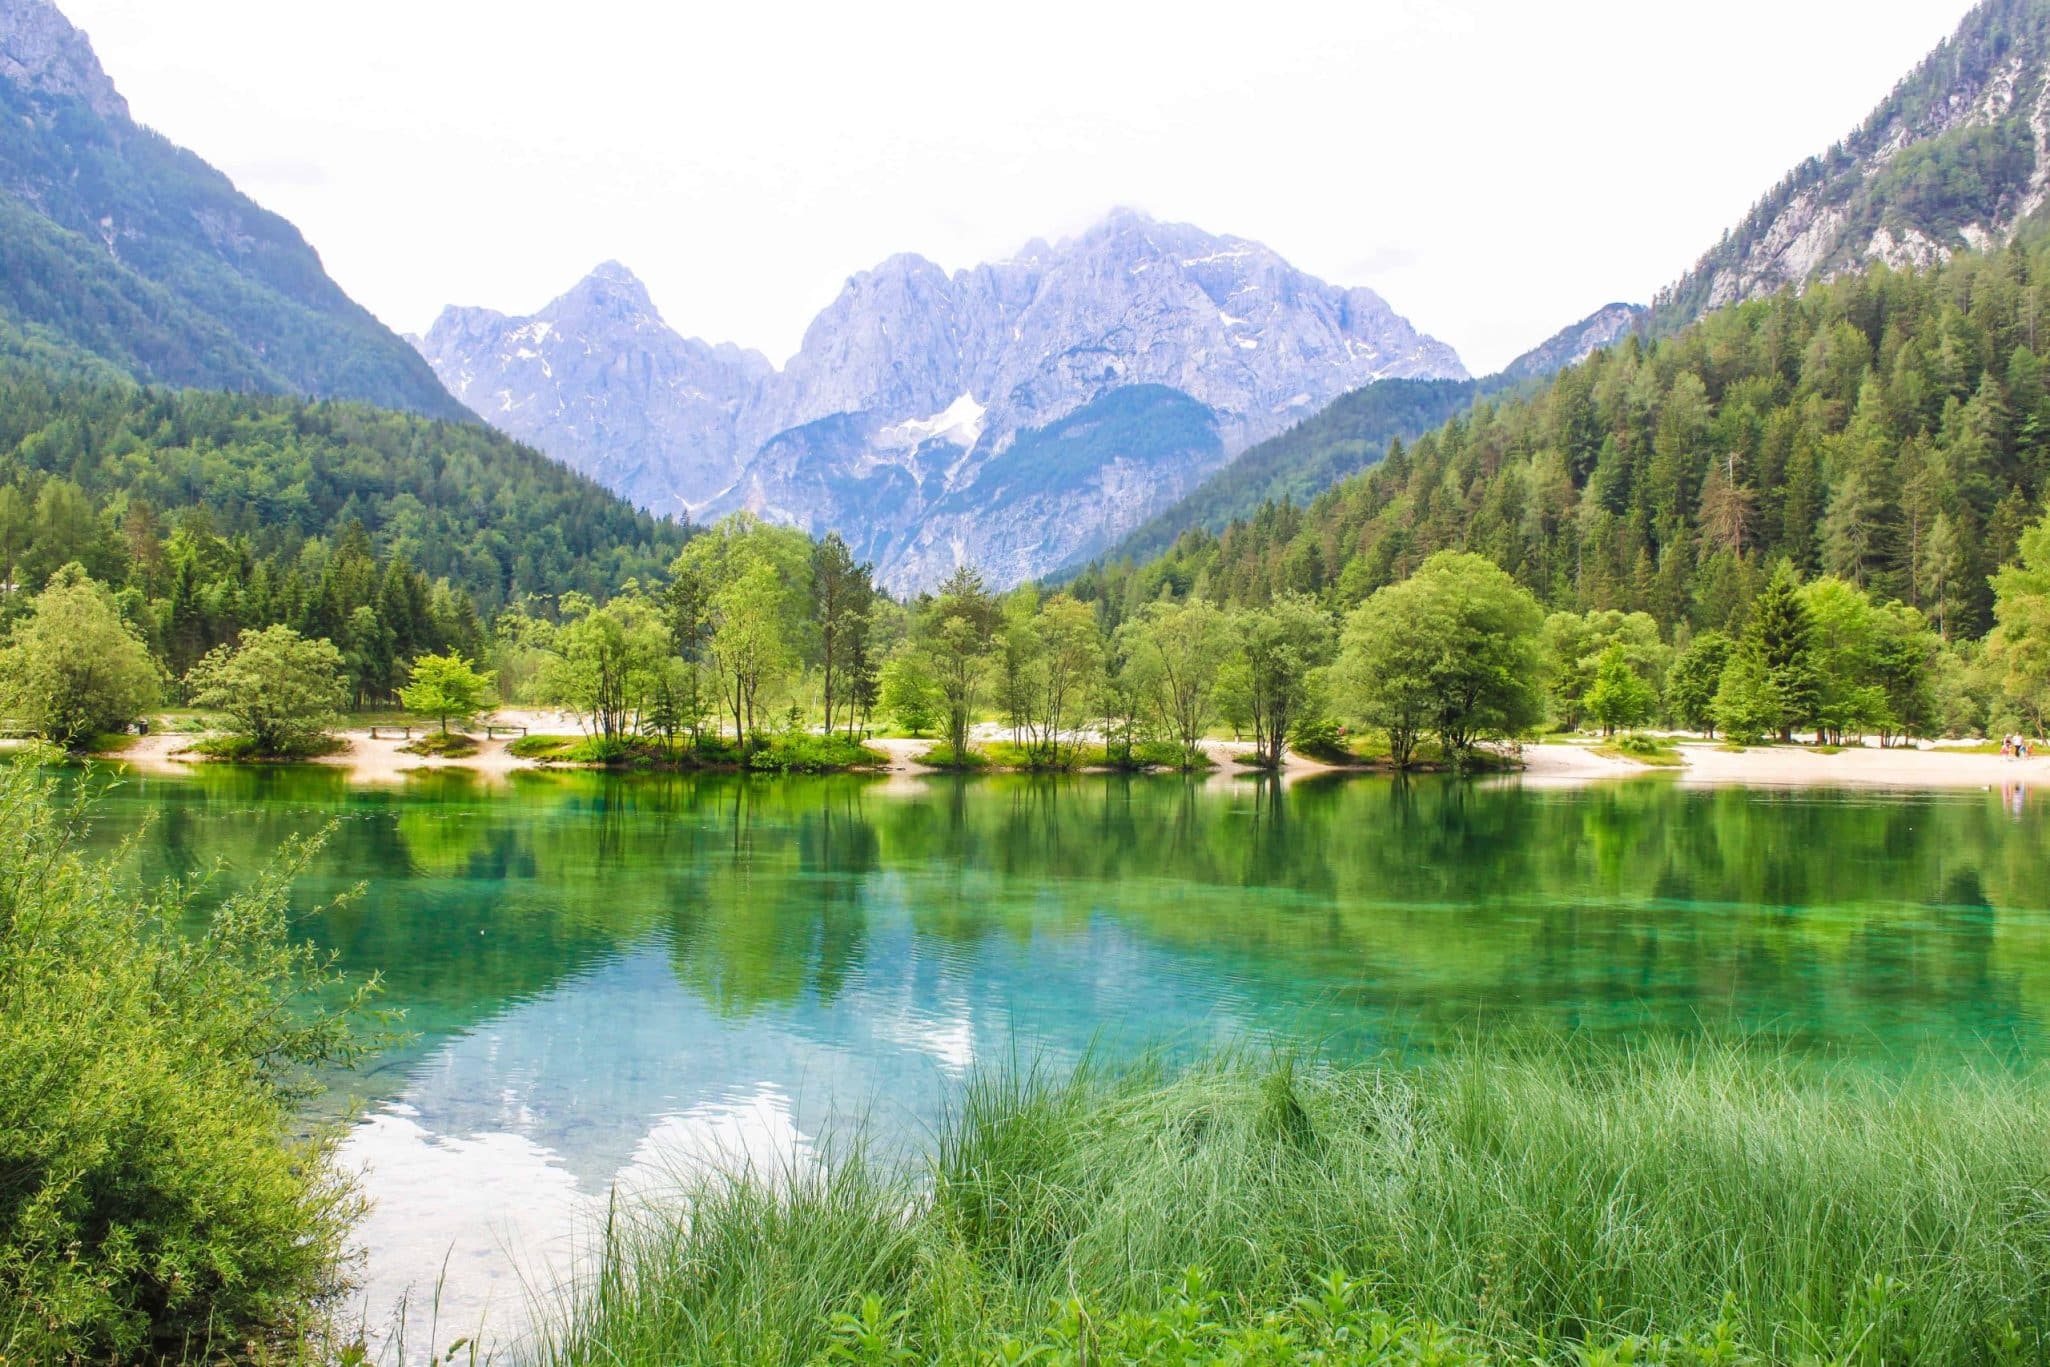 20 unique things to do in Slovenia that will truly amaze you